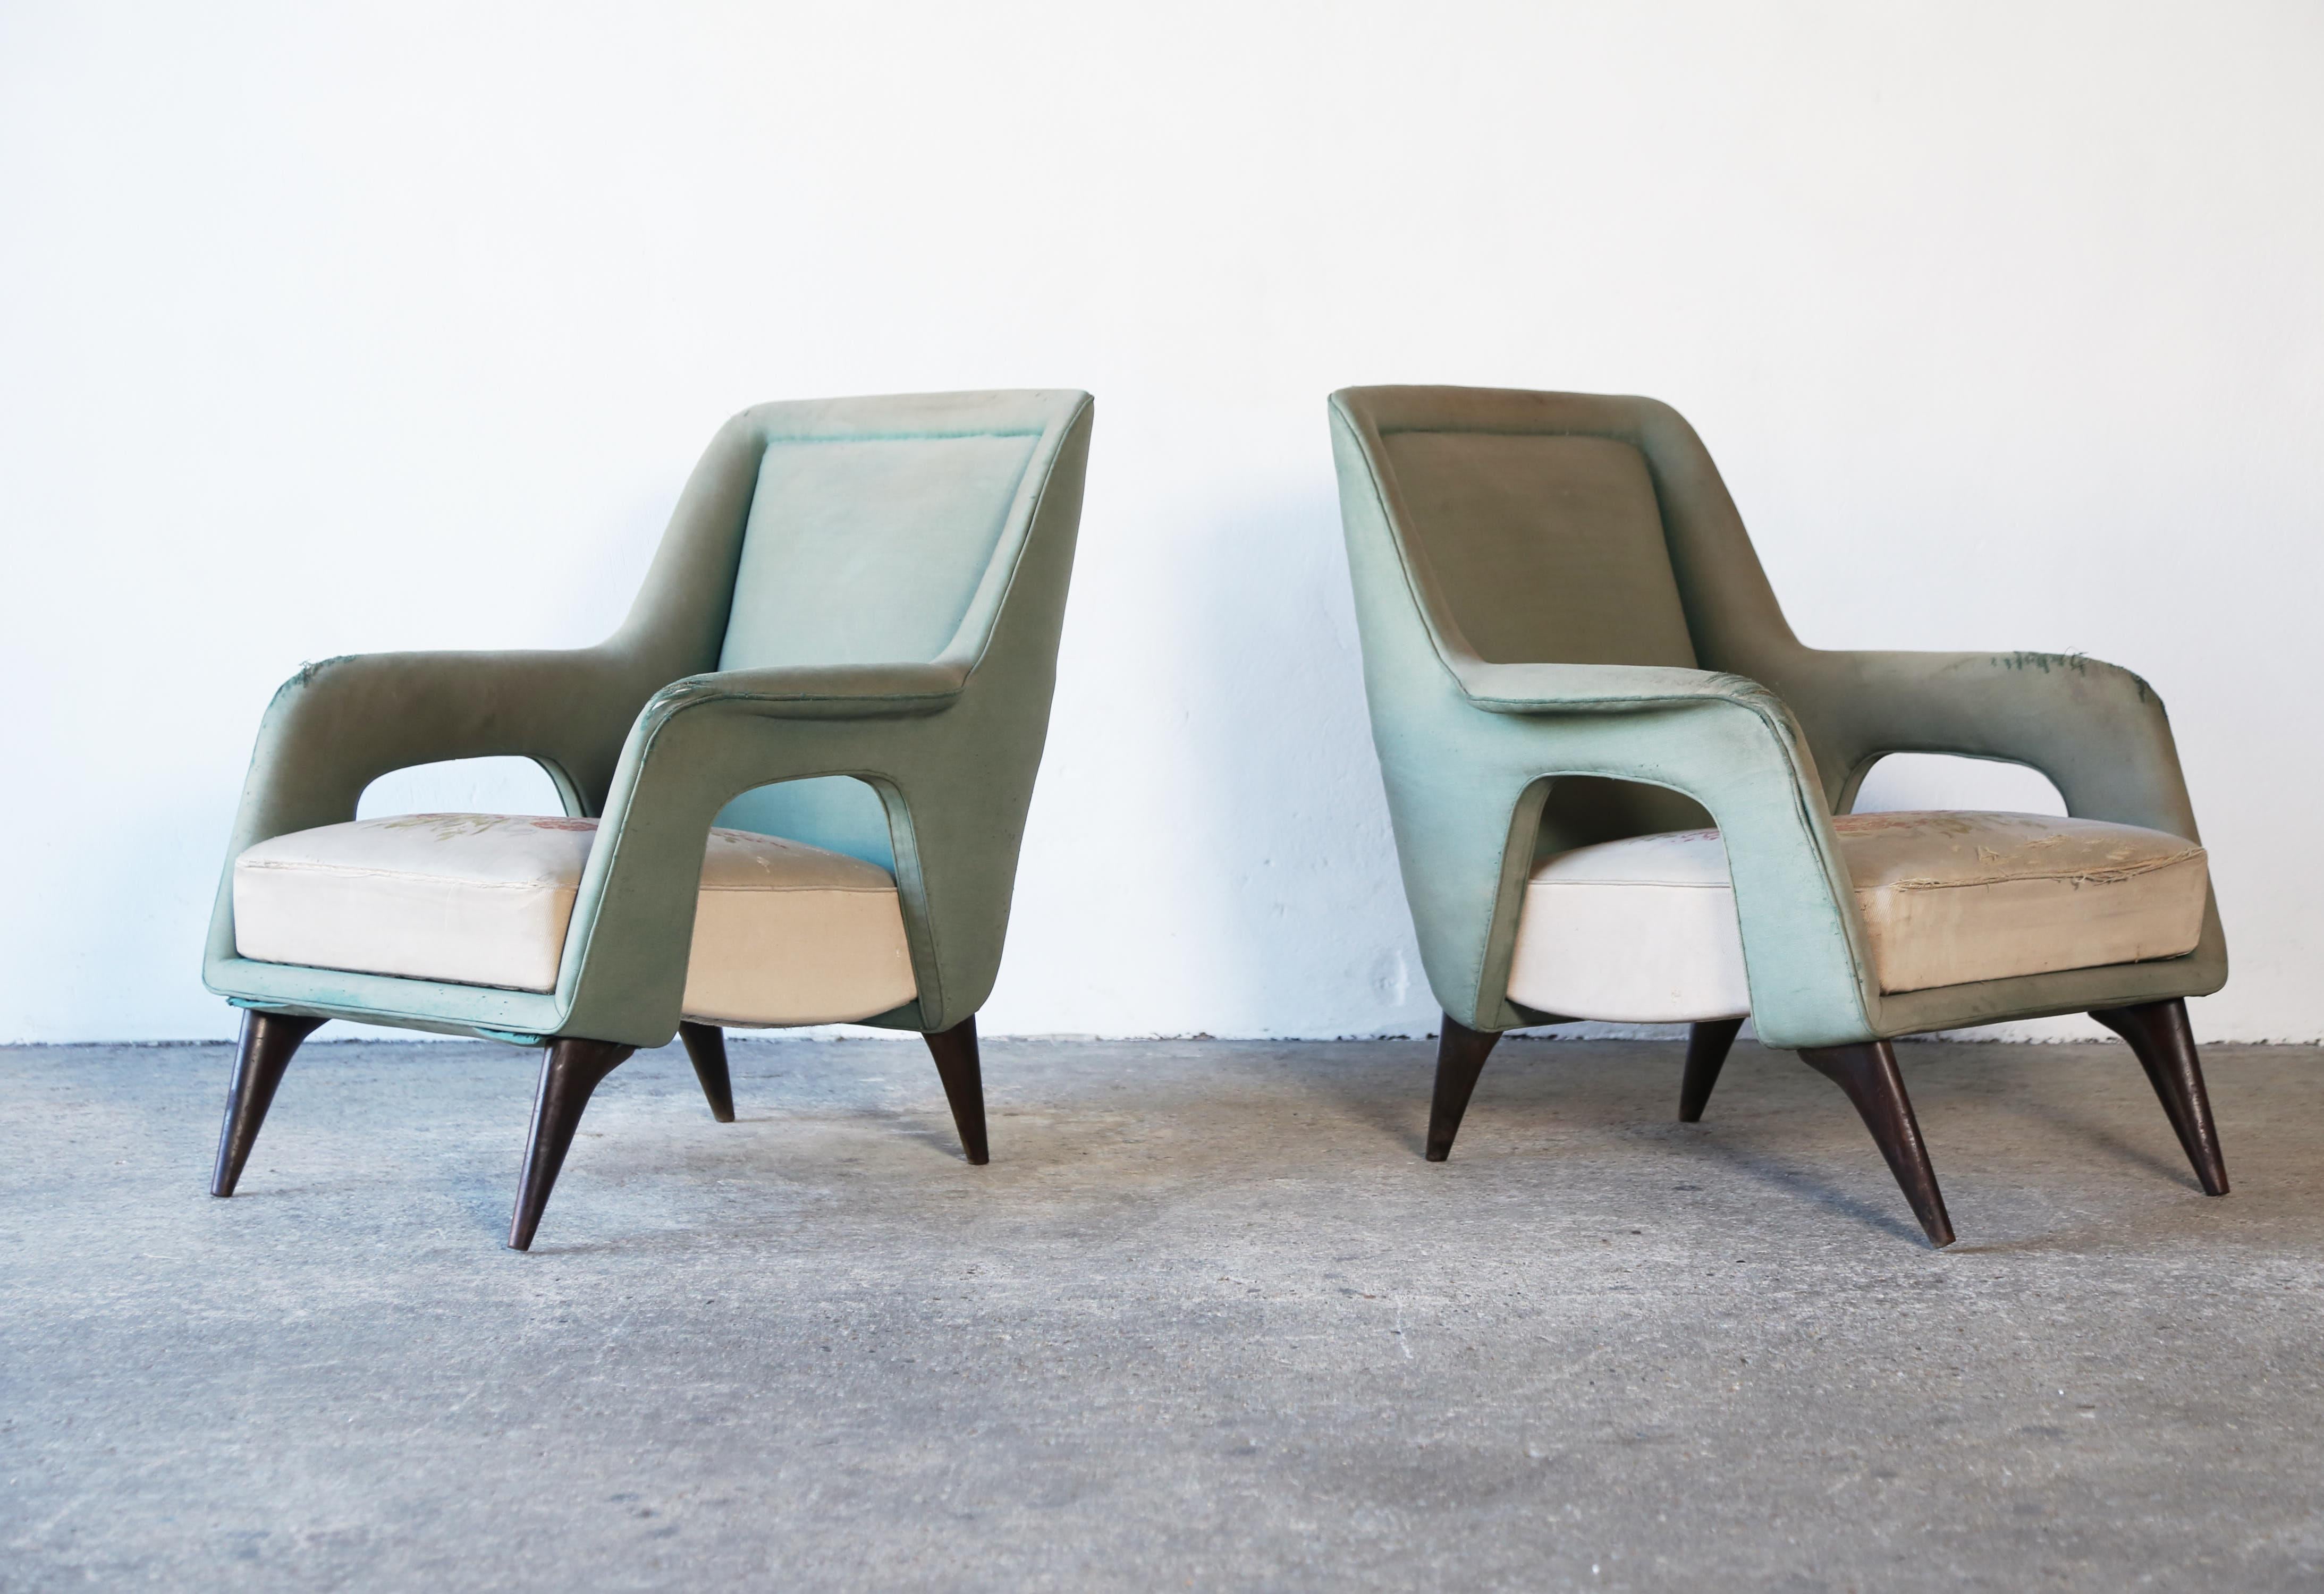 Outstanding, Rare Lounge Chairs, Italy, 1950s, For Reupholstery In Good Condition For Sale In London, GB